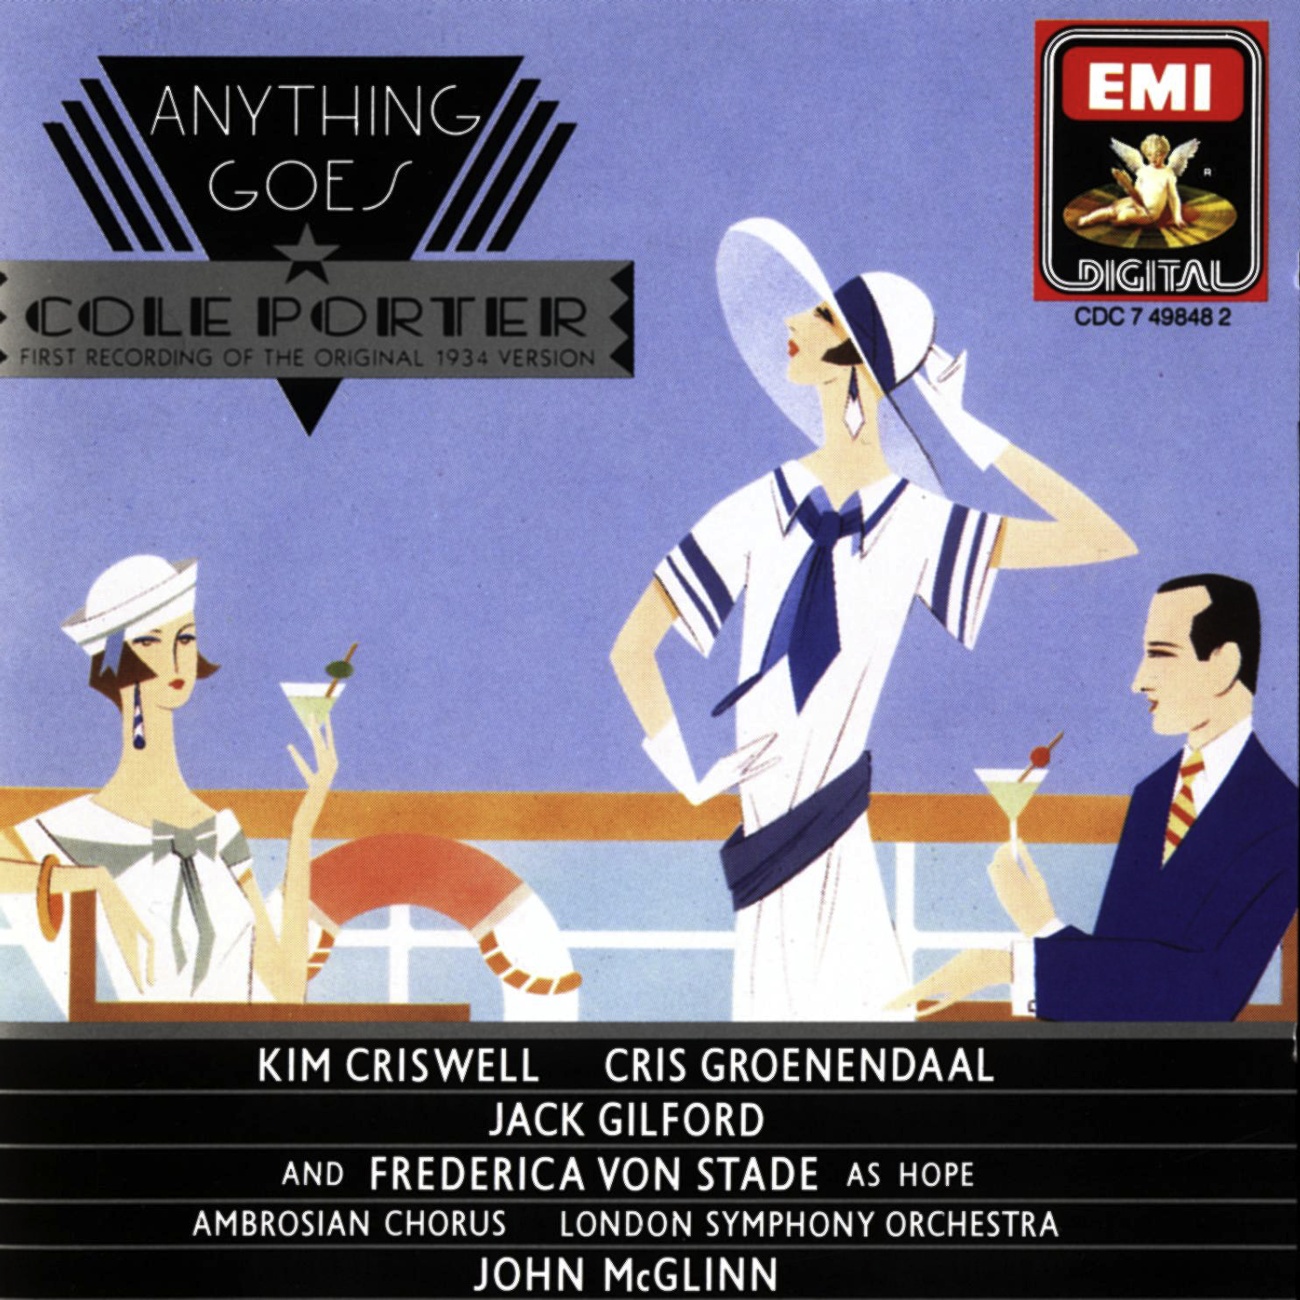 Anything Goes (original 1934 version), Act II: The gypsy in me (Hope)